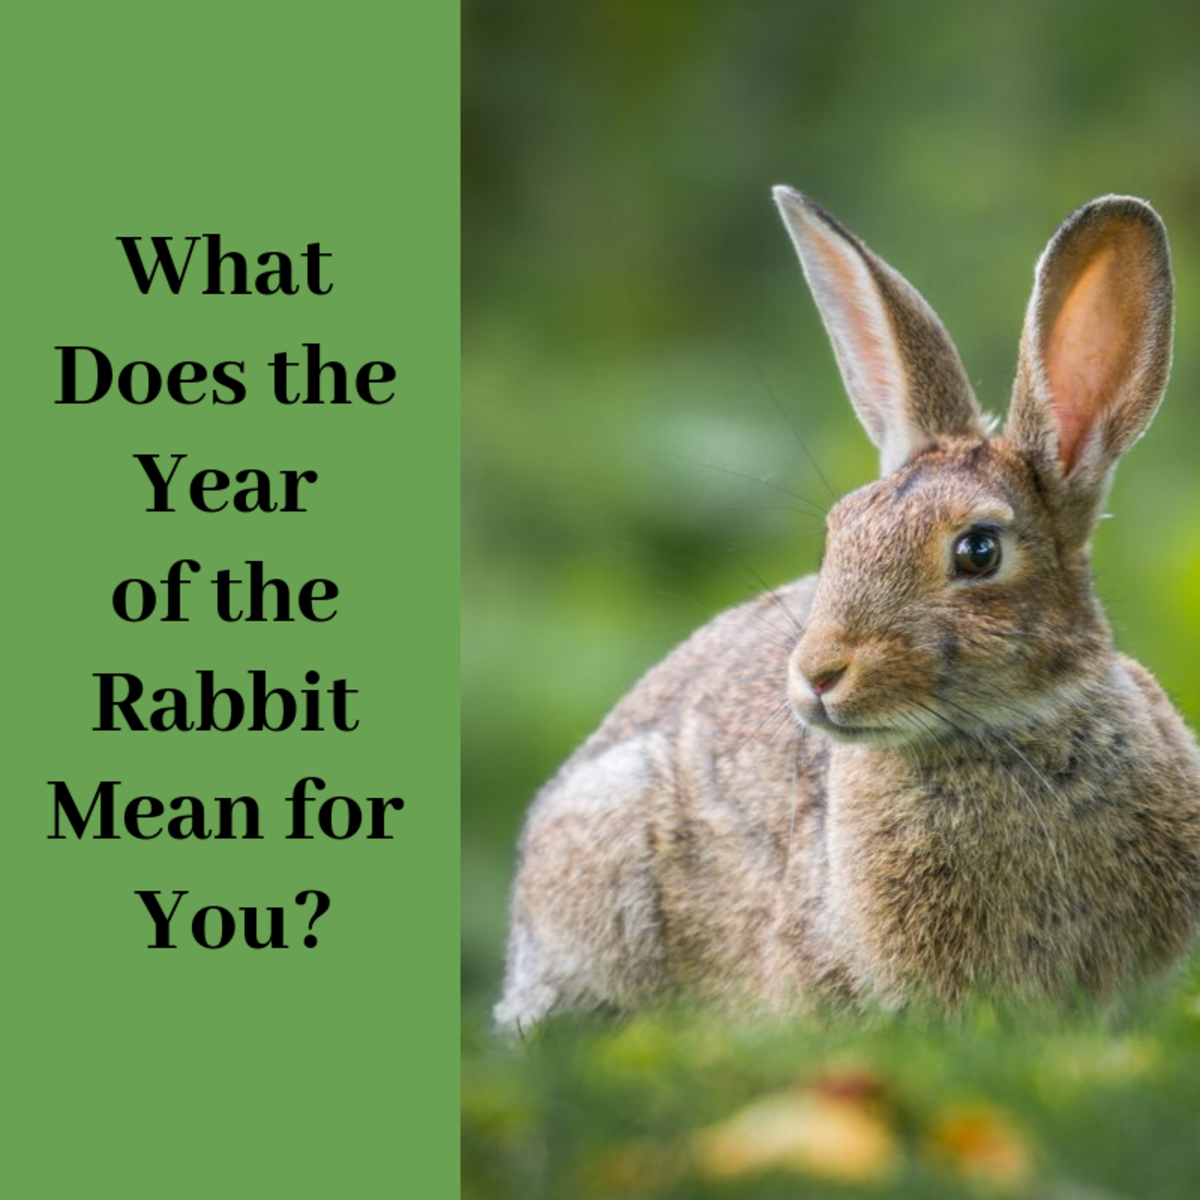 Find out what the Year of the Rabbit means for you?